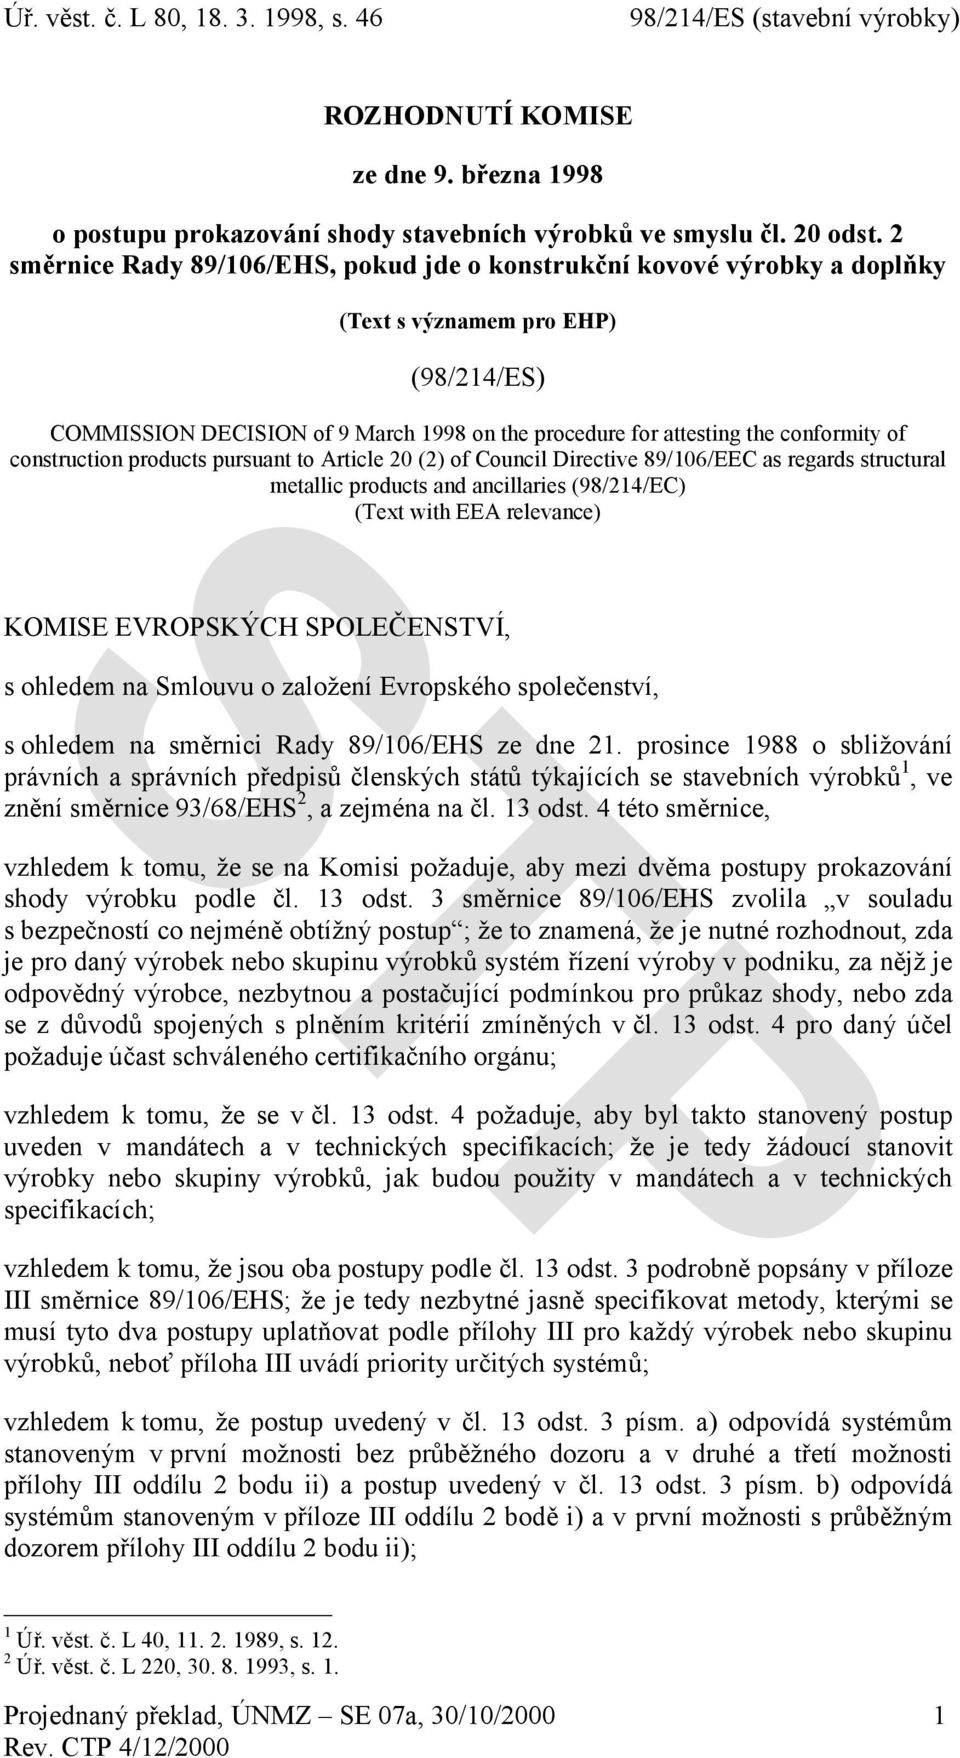 construction products pursuant to Article 20 (2) of Council Directive 89/106/EEC as regards structural metallic products and ancillaries (98/214/EC) (Text with EEA relevance) KOMISE EVROPSKÝCH